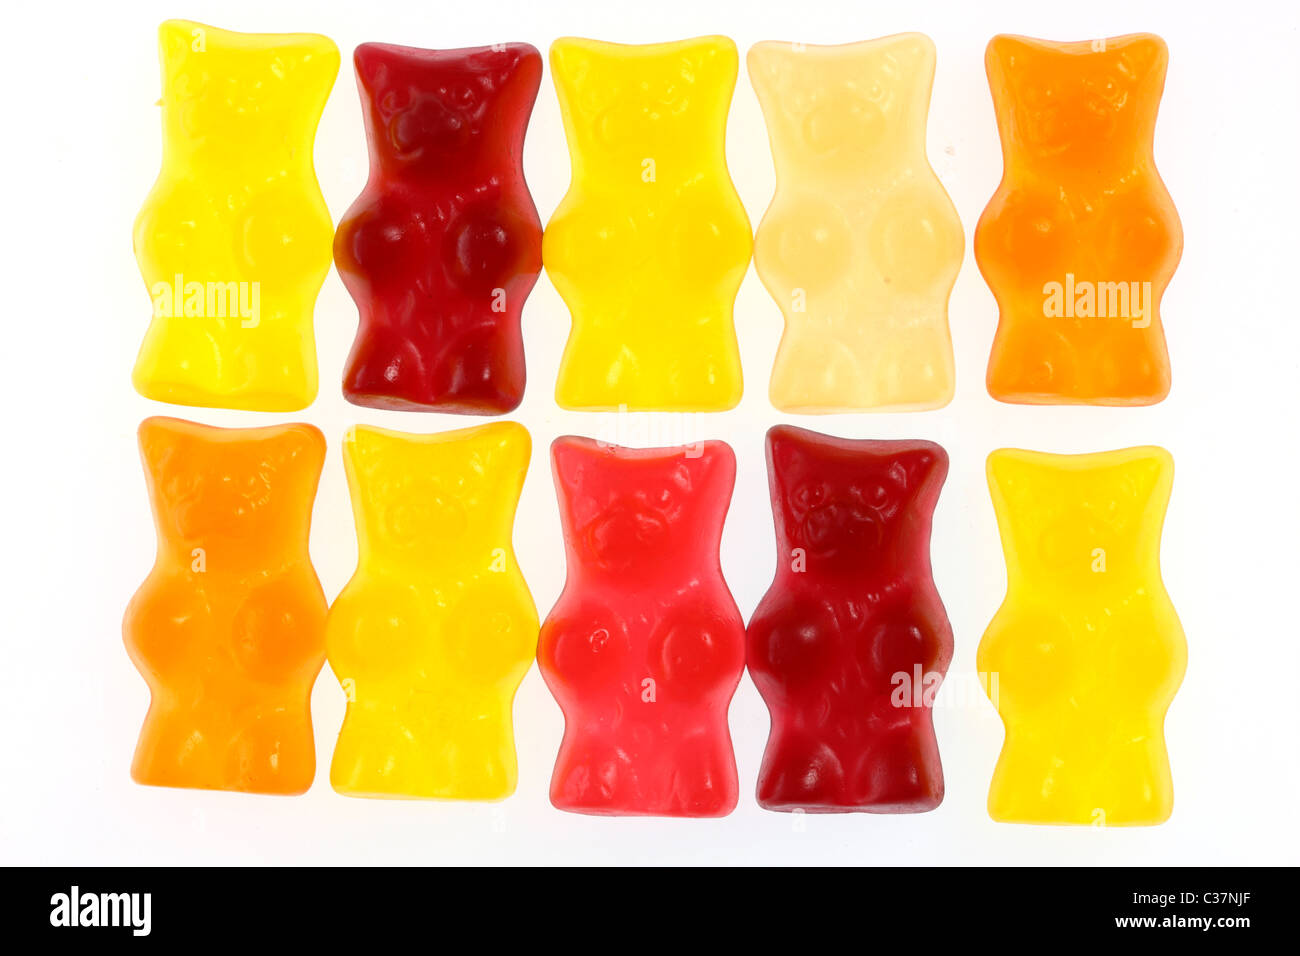 Jellybabies, gummy bears, different colors. Sweets. Stock Photo